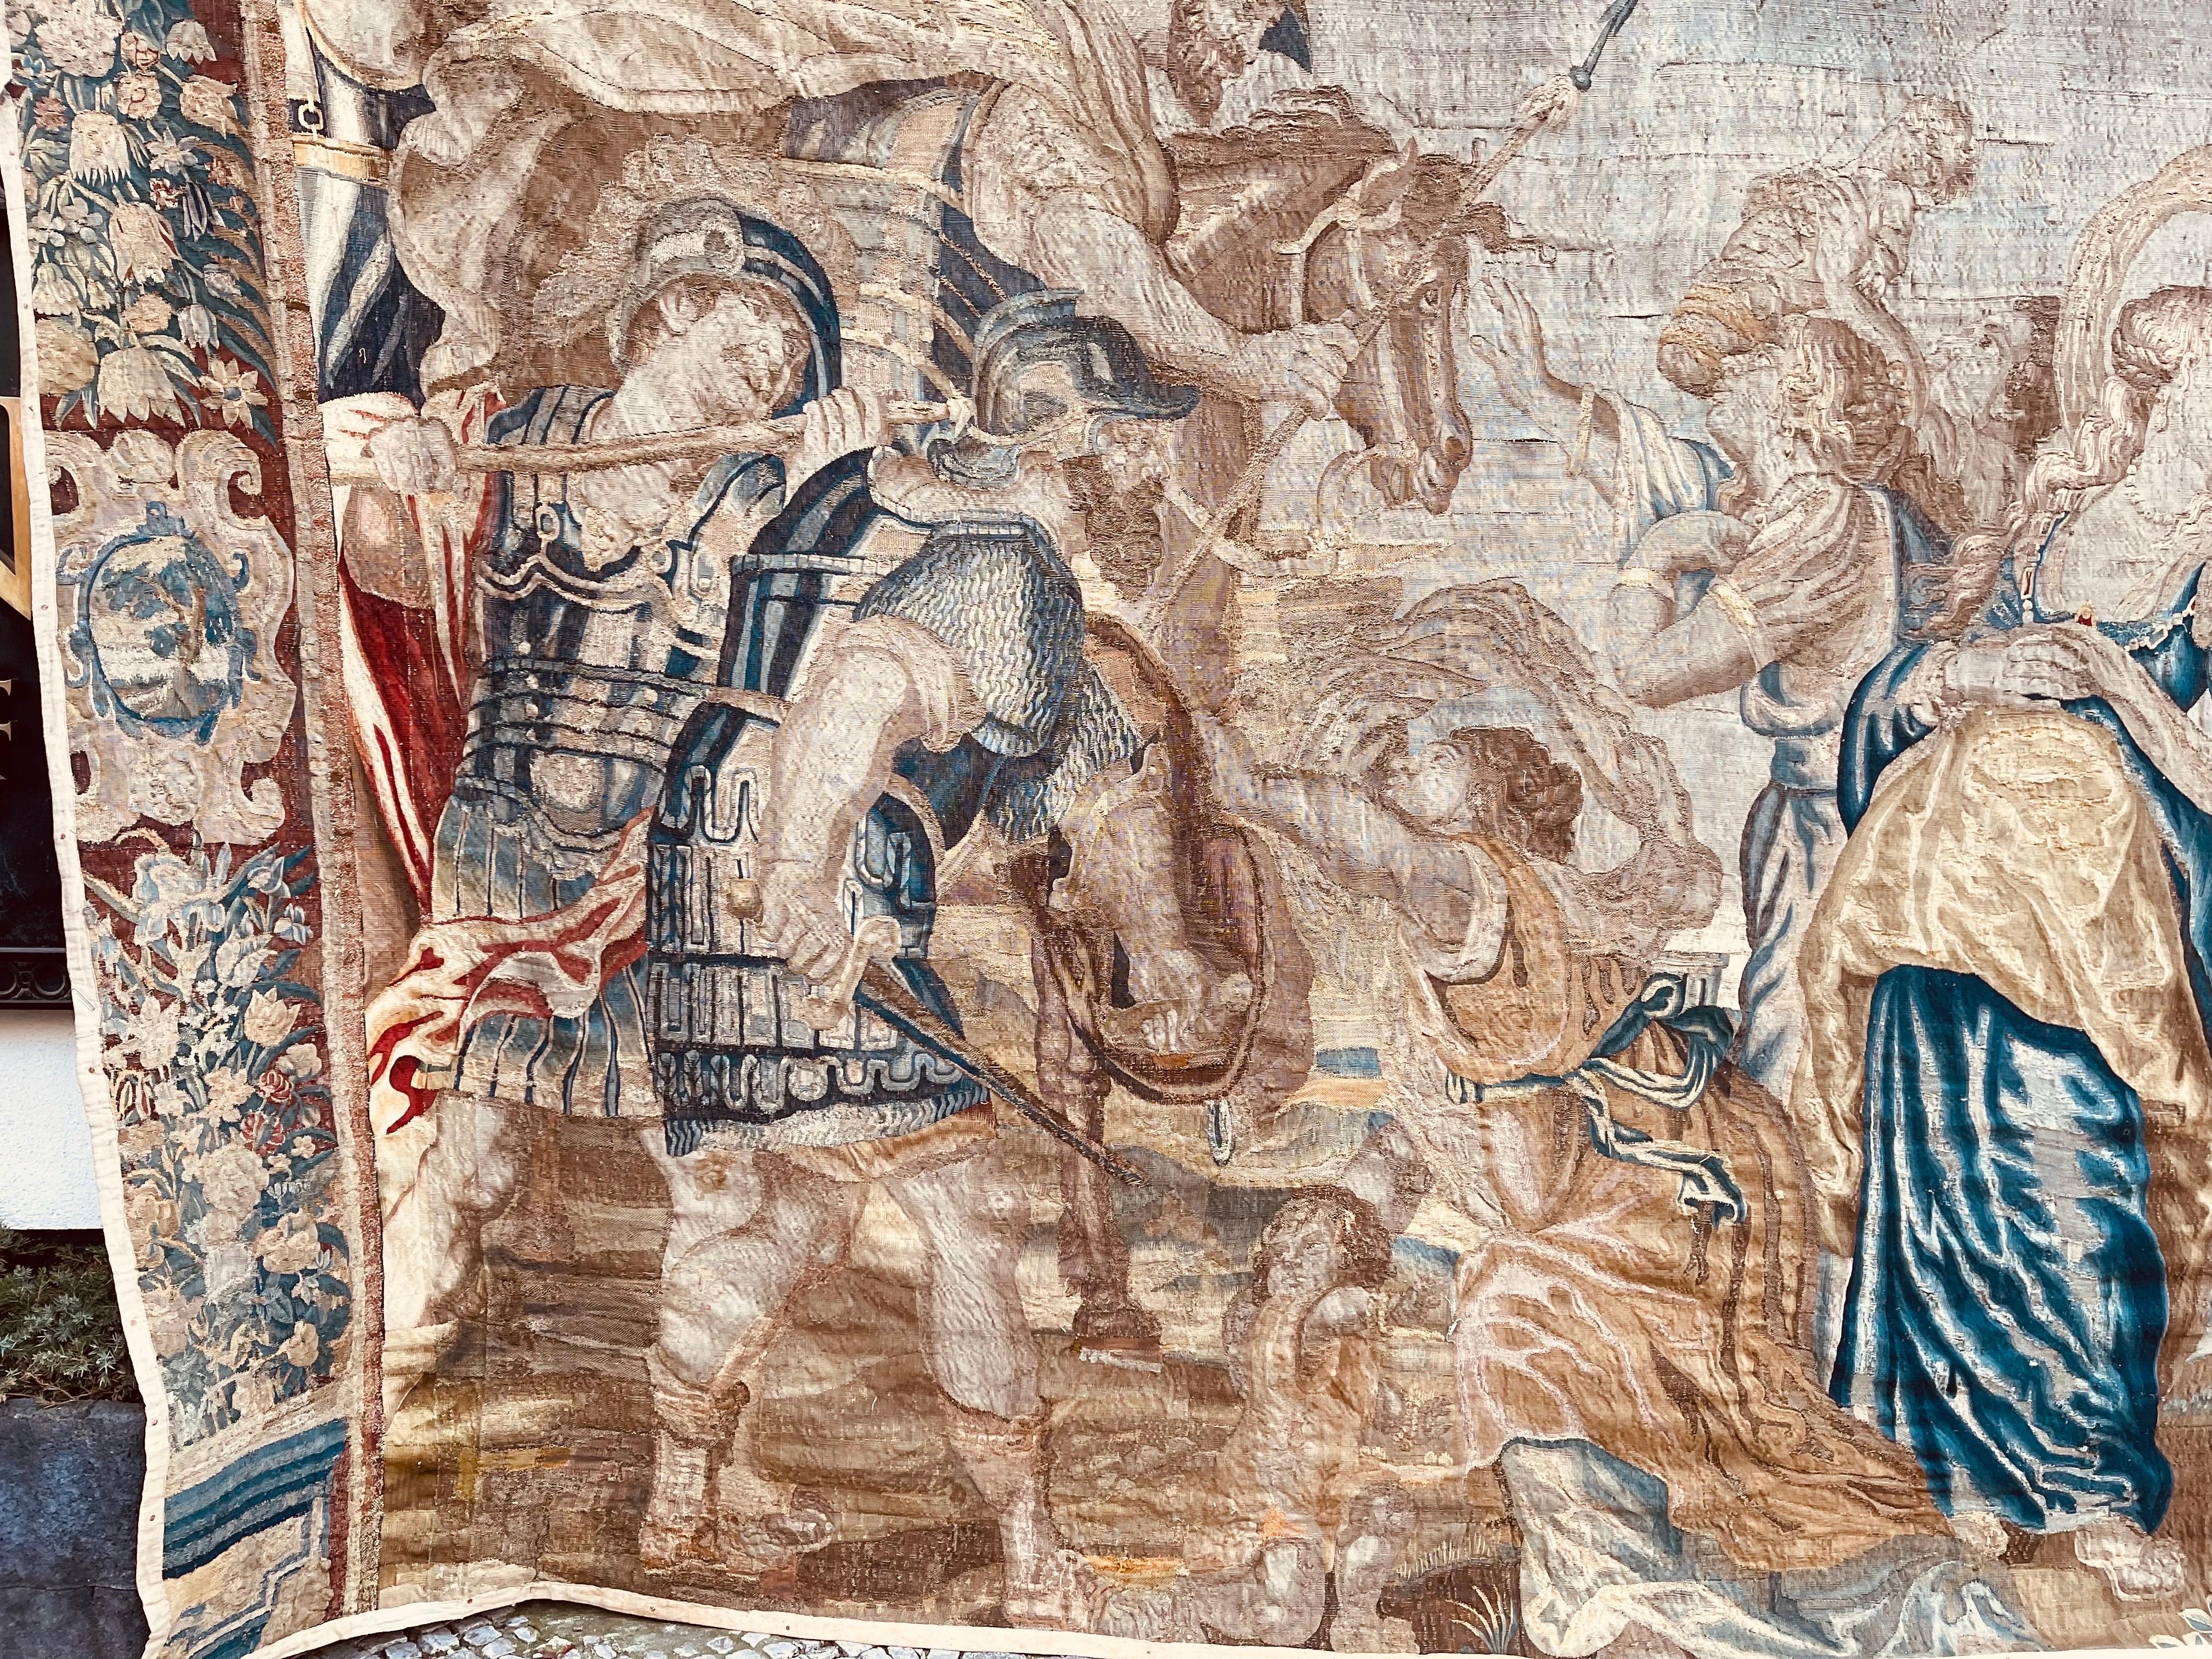 Hand-Woven 17th Century Tapestry/Gobelein Alexander The Great And Darius III Persian King For Sale